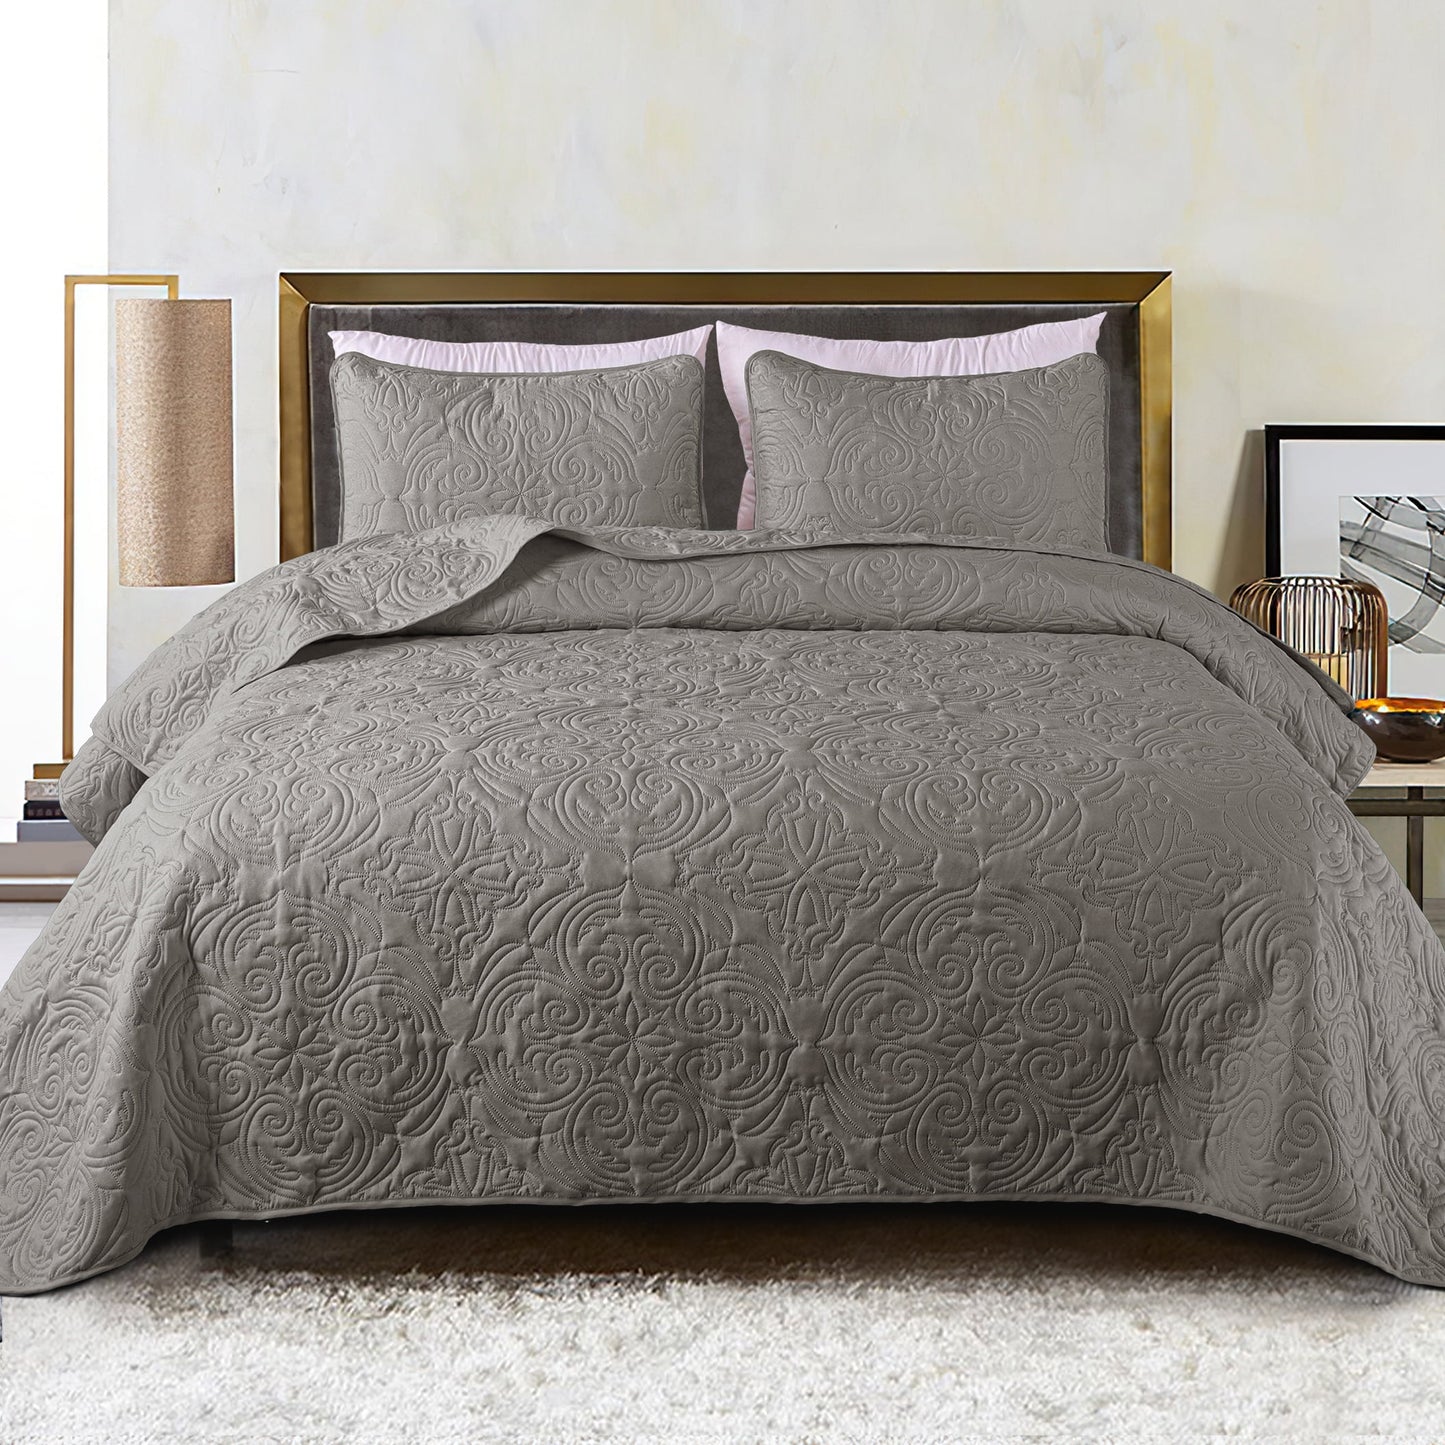 Exclusivo Mezcla Queen Quilt Bedding Set, Lightweight Vintage Queen Size Quilts with Pillow Shams, Soft Bedspreads Coverlets for All Seasons, (96"x90", Grey)